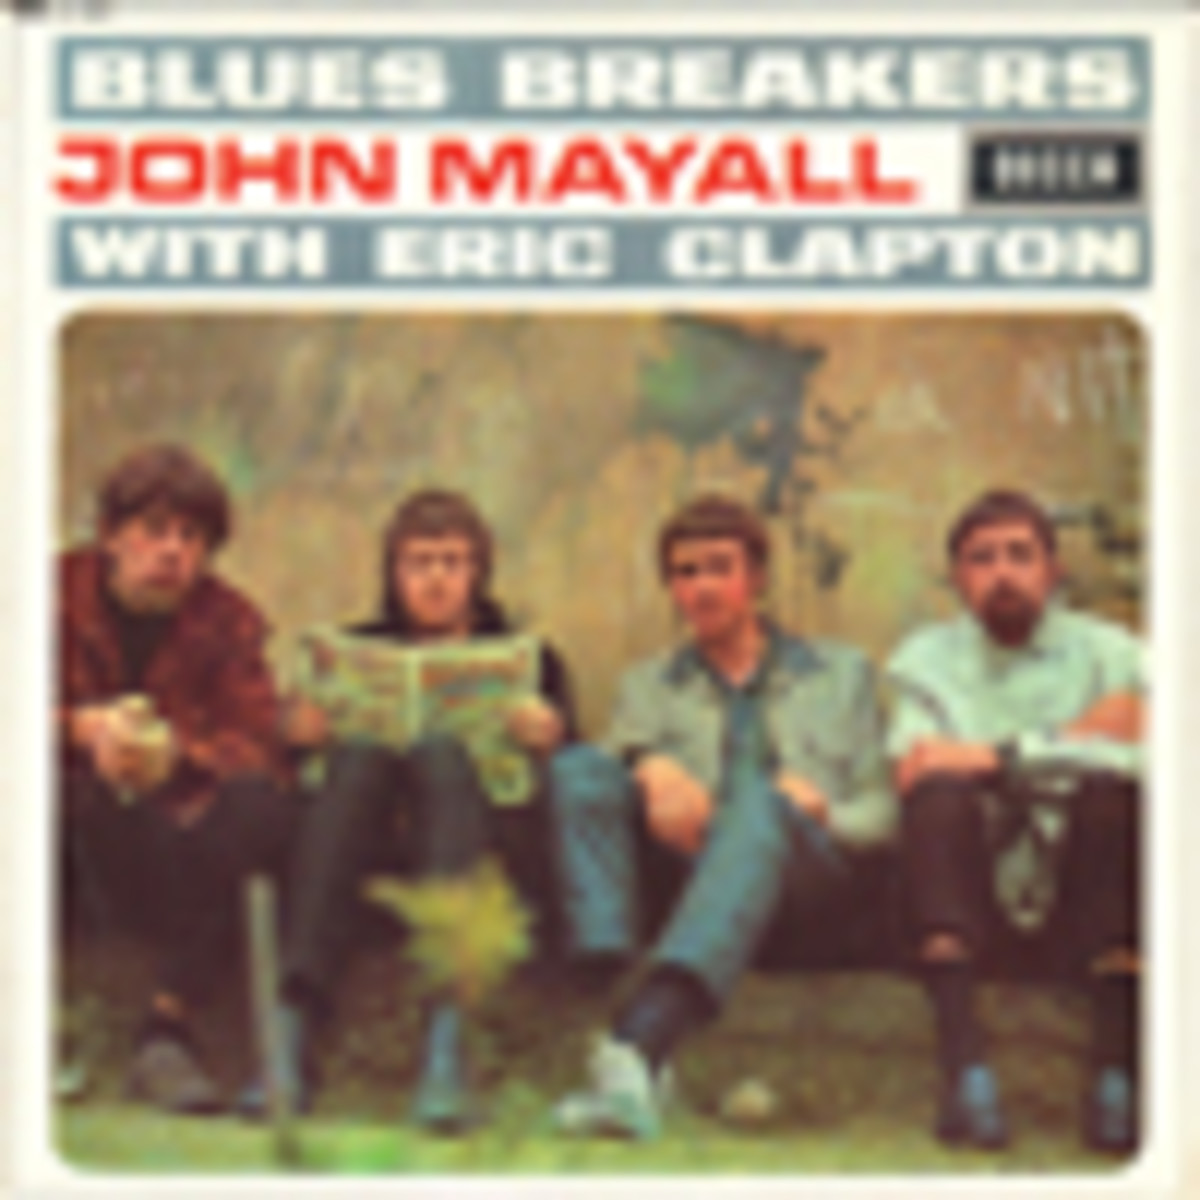 John Mayall and the Bluesbreakers with Eric Clapton